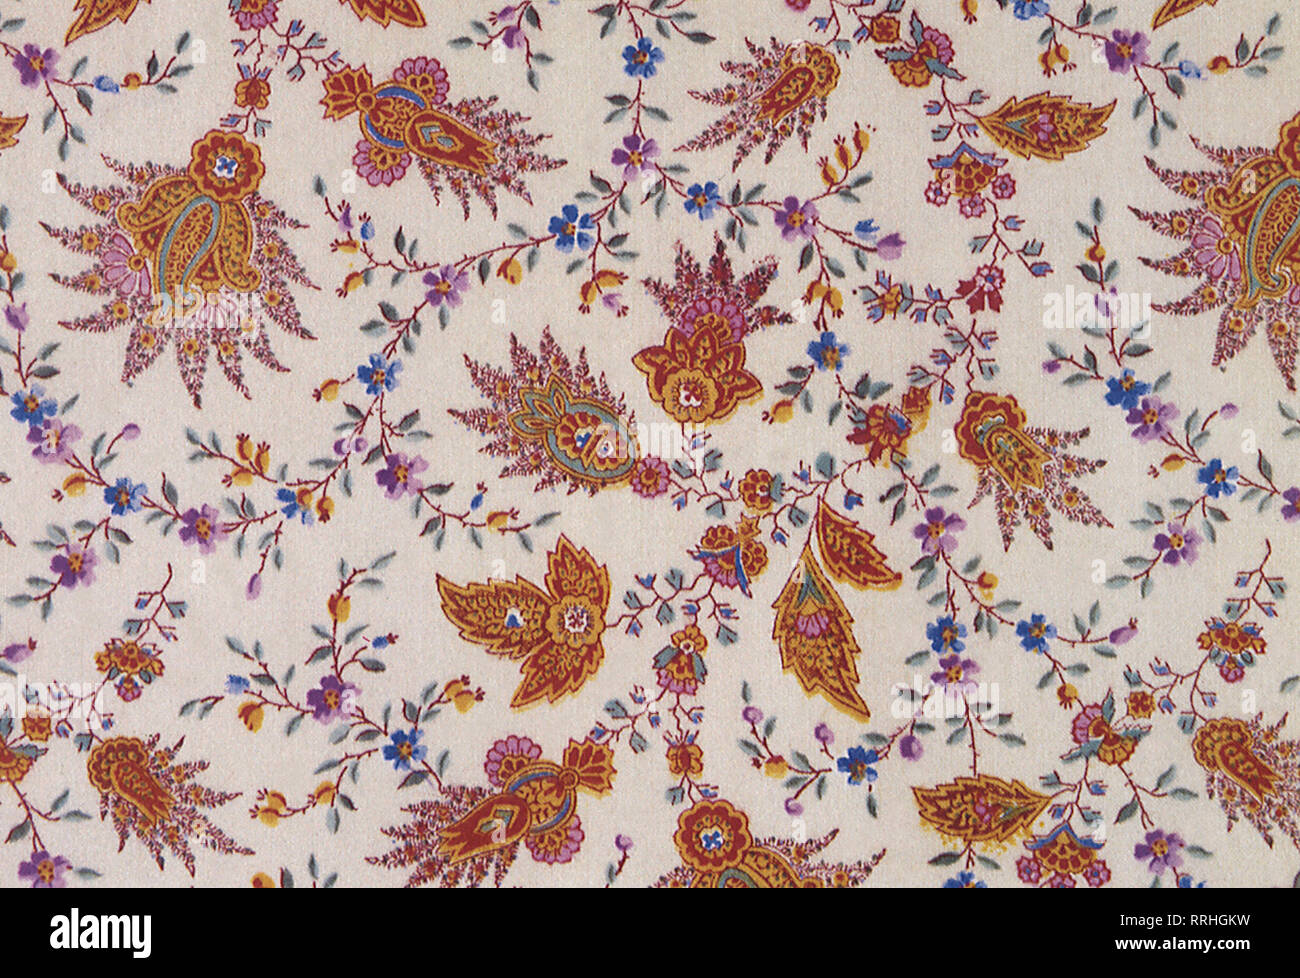 Paisley floral pattern repeat on off white background. Stock Photo